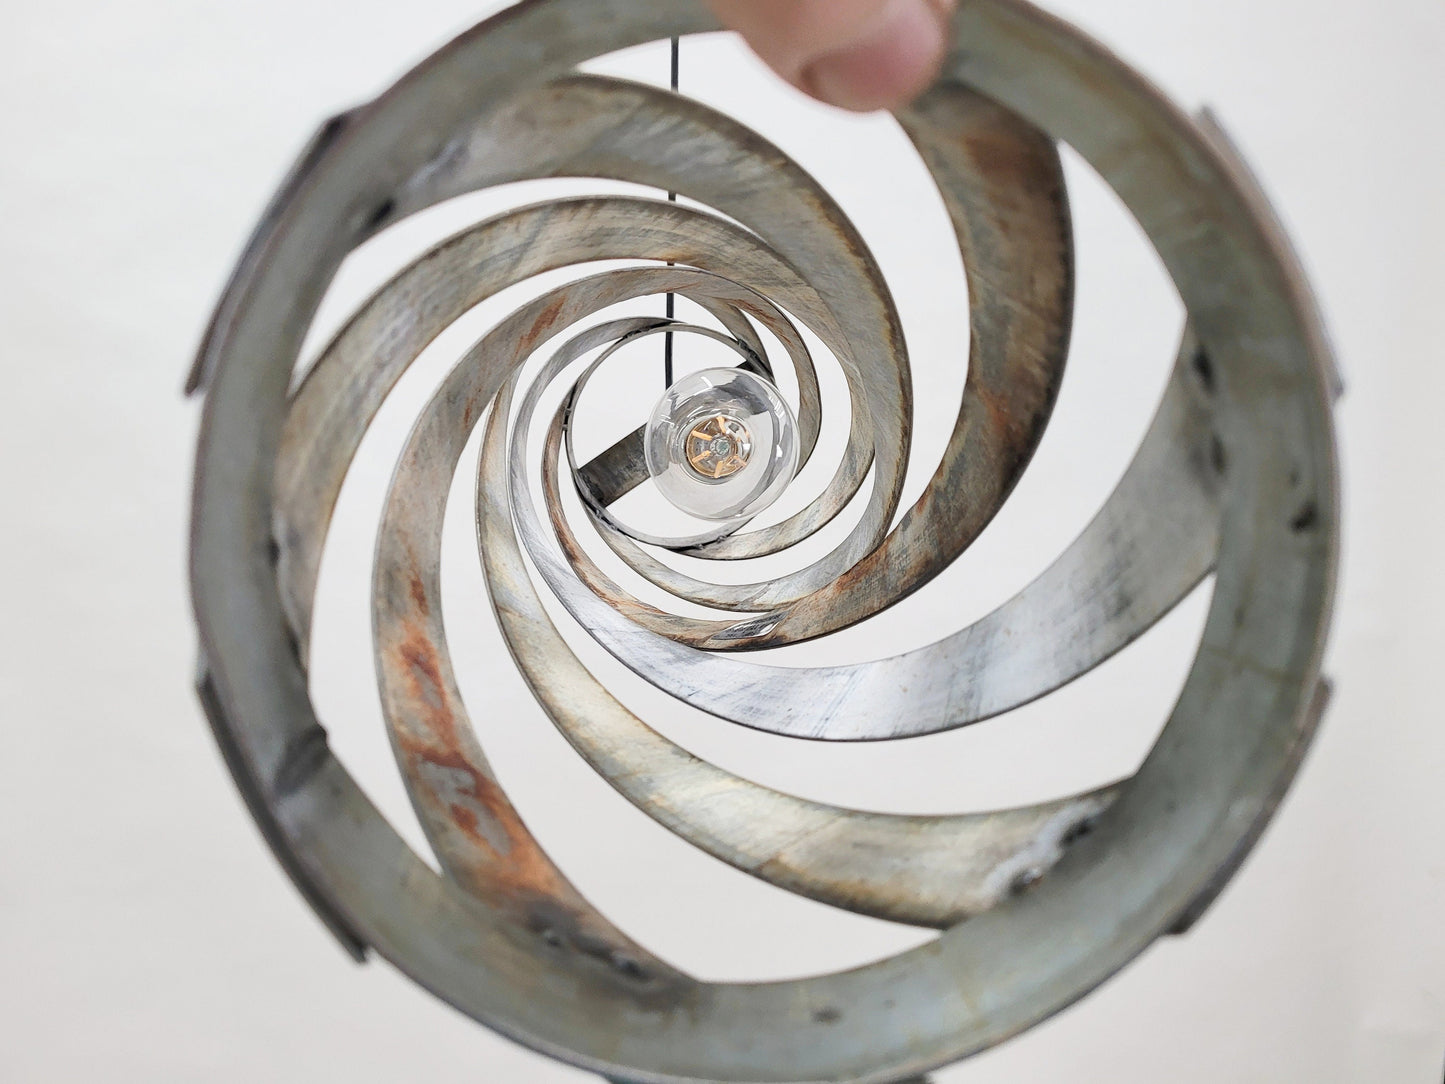 Wine Barrel Ring Swirl Pendant Light - Parcella - Made from retired California wine barrel rings. 100% Recycled!